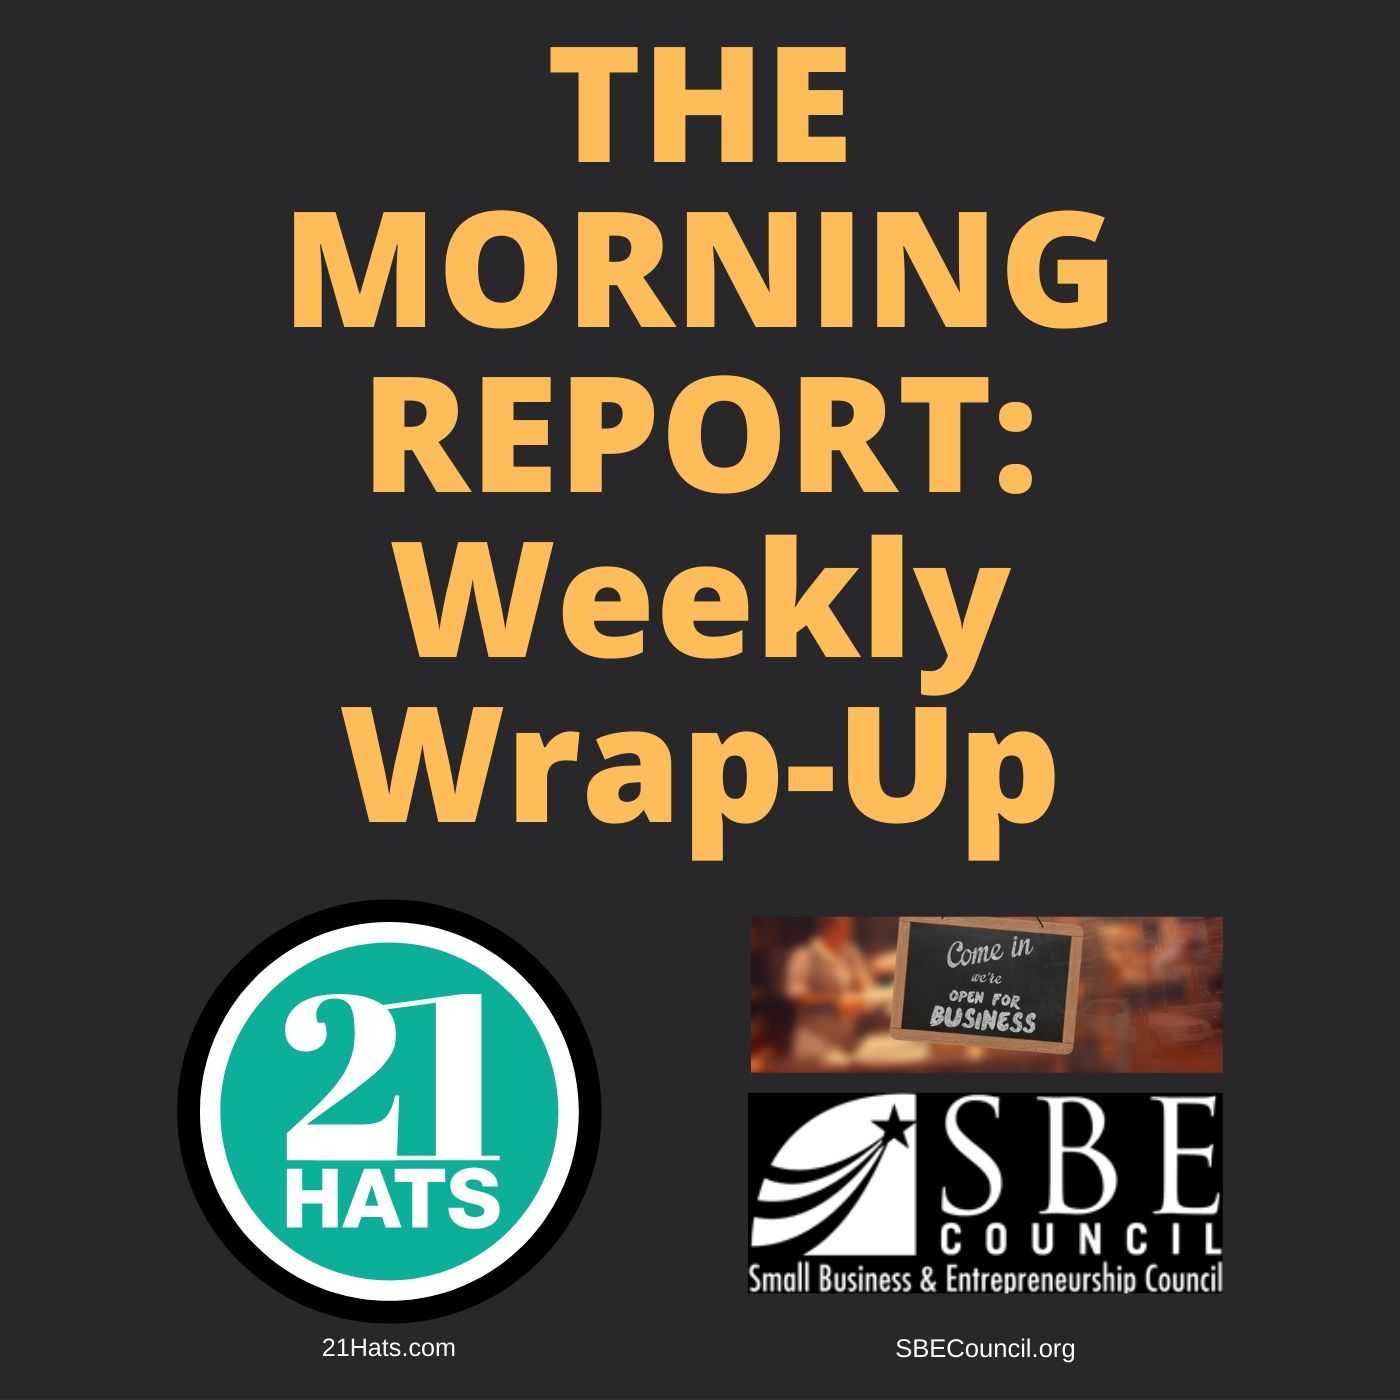 Morning Report Podcast - Weekly News Wrap-Up: Fri Sept 10, 2021